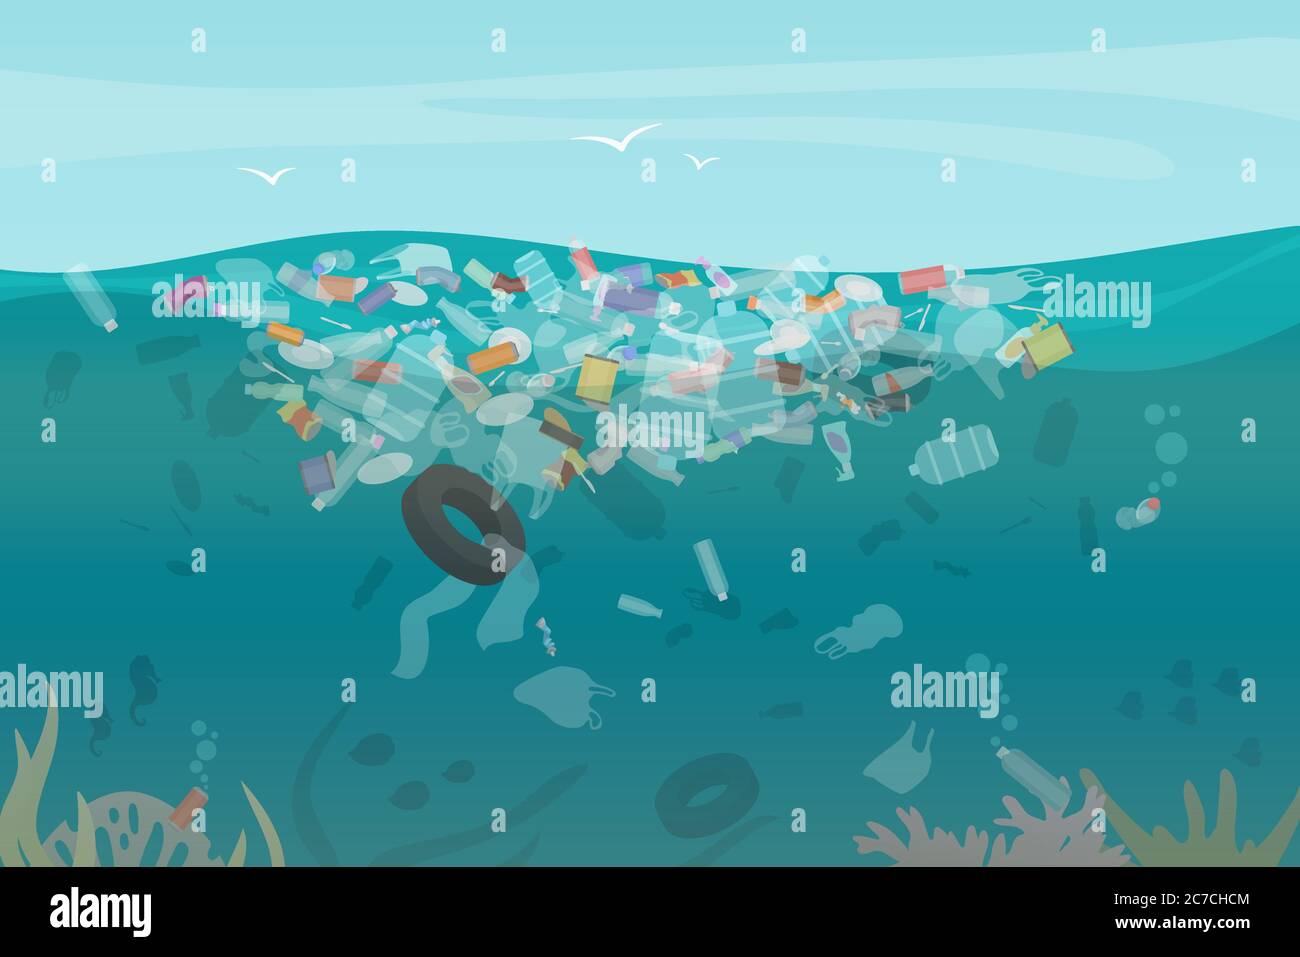 Plastic pollution trash underwater sea with different kinds of garbage - plastic bottles, bags, wastes floating in water. Sea ocean water pollution concept vector illustration Stock Vector